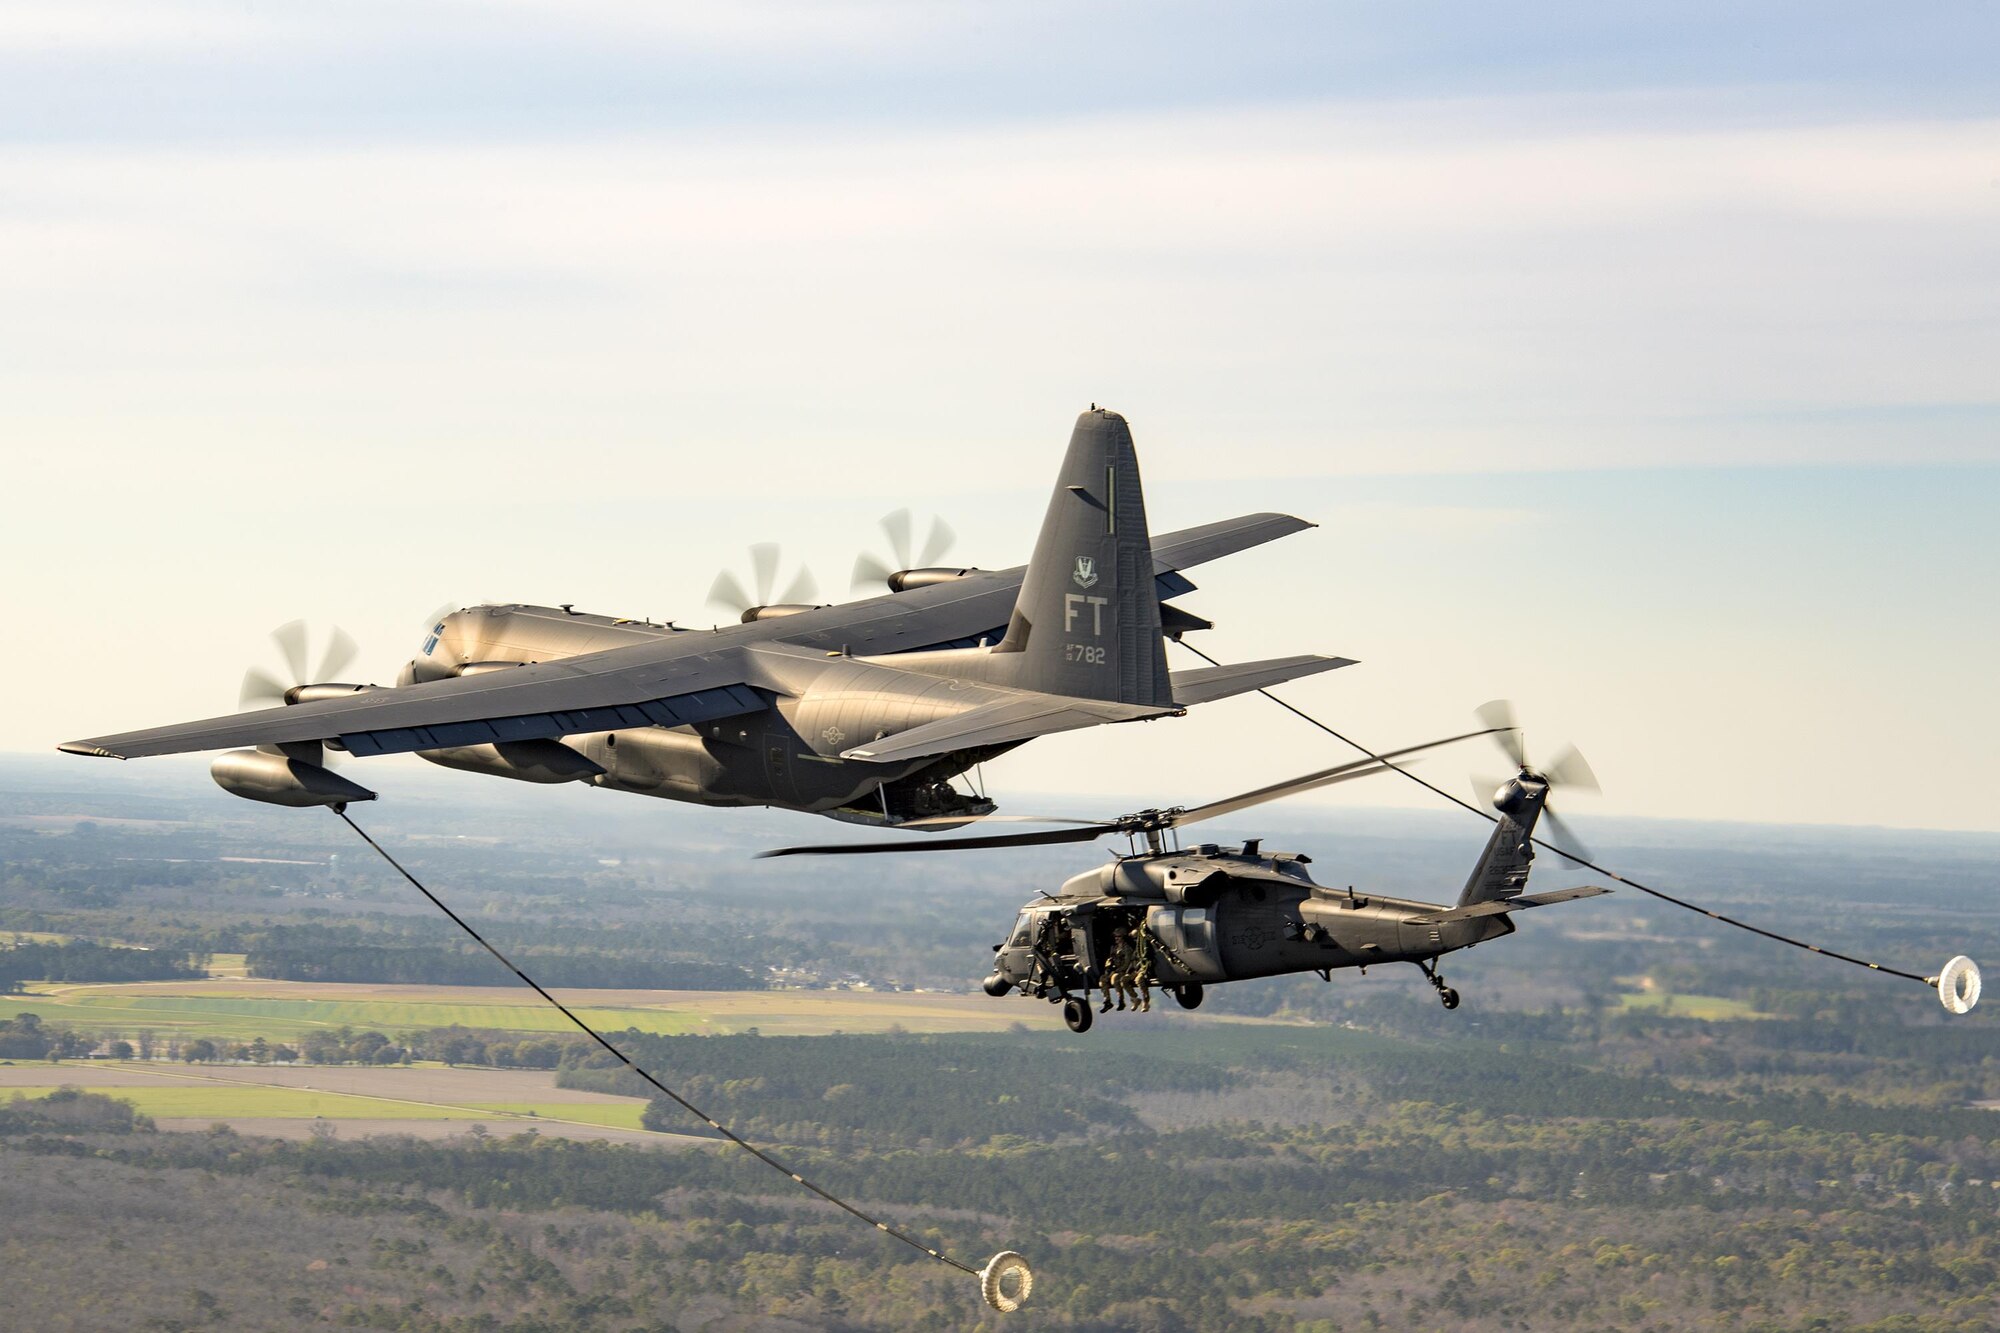 Refuel
An HC-130J Combat King II and an HH-60G Pave Hawk conduct a refueling demonstration during the 75th Anniversary Flying Tiger Reunion, March 10, 2017, at Moody Air Force Base, Ga. In 1941, President Roosevelt signed an executive order forming the American Volunteer Group. The AVG was organized into the 1st, 2nd, and 3rd Pursuit Squadrons and later disbanded and replaced by the 23d Fighter Group in 1942. Under the command of Gen. Claire Chennault, the Flying Tigers comprised of the 74th, 75th, and 76th Pursuit Squadrons defended China against the Japanese. Throughout World War II, the Flying Tigers achieved combat success and flew the US-made Curtiss P-40 Warhawks painted with the shark-mouth design. (U.S. Air Force photo by Staff Sgt. Ryan Callaghan)
